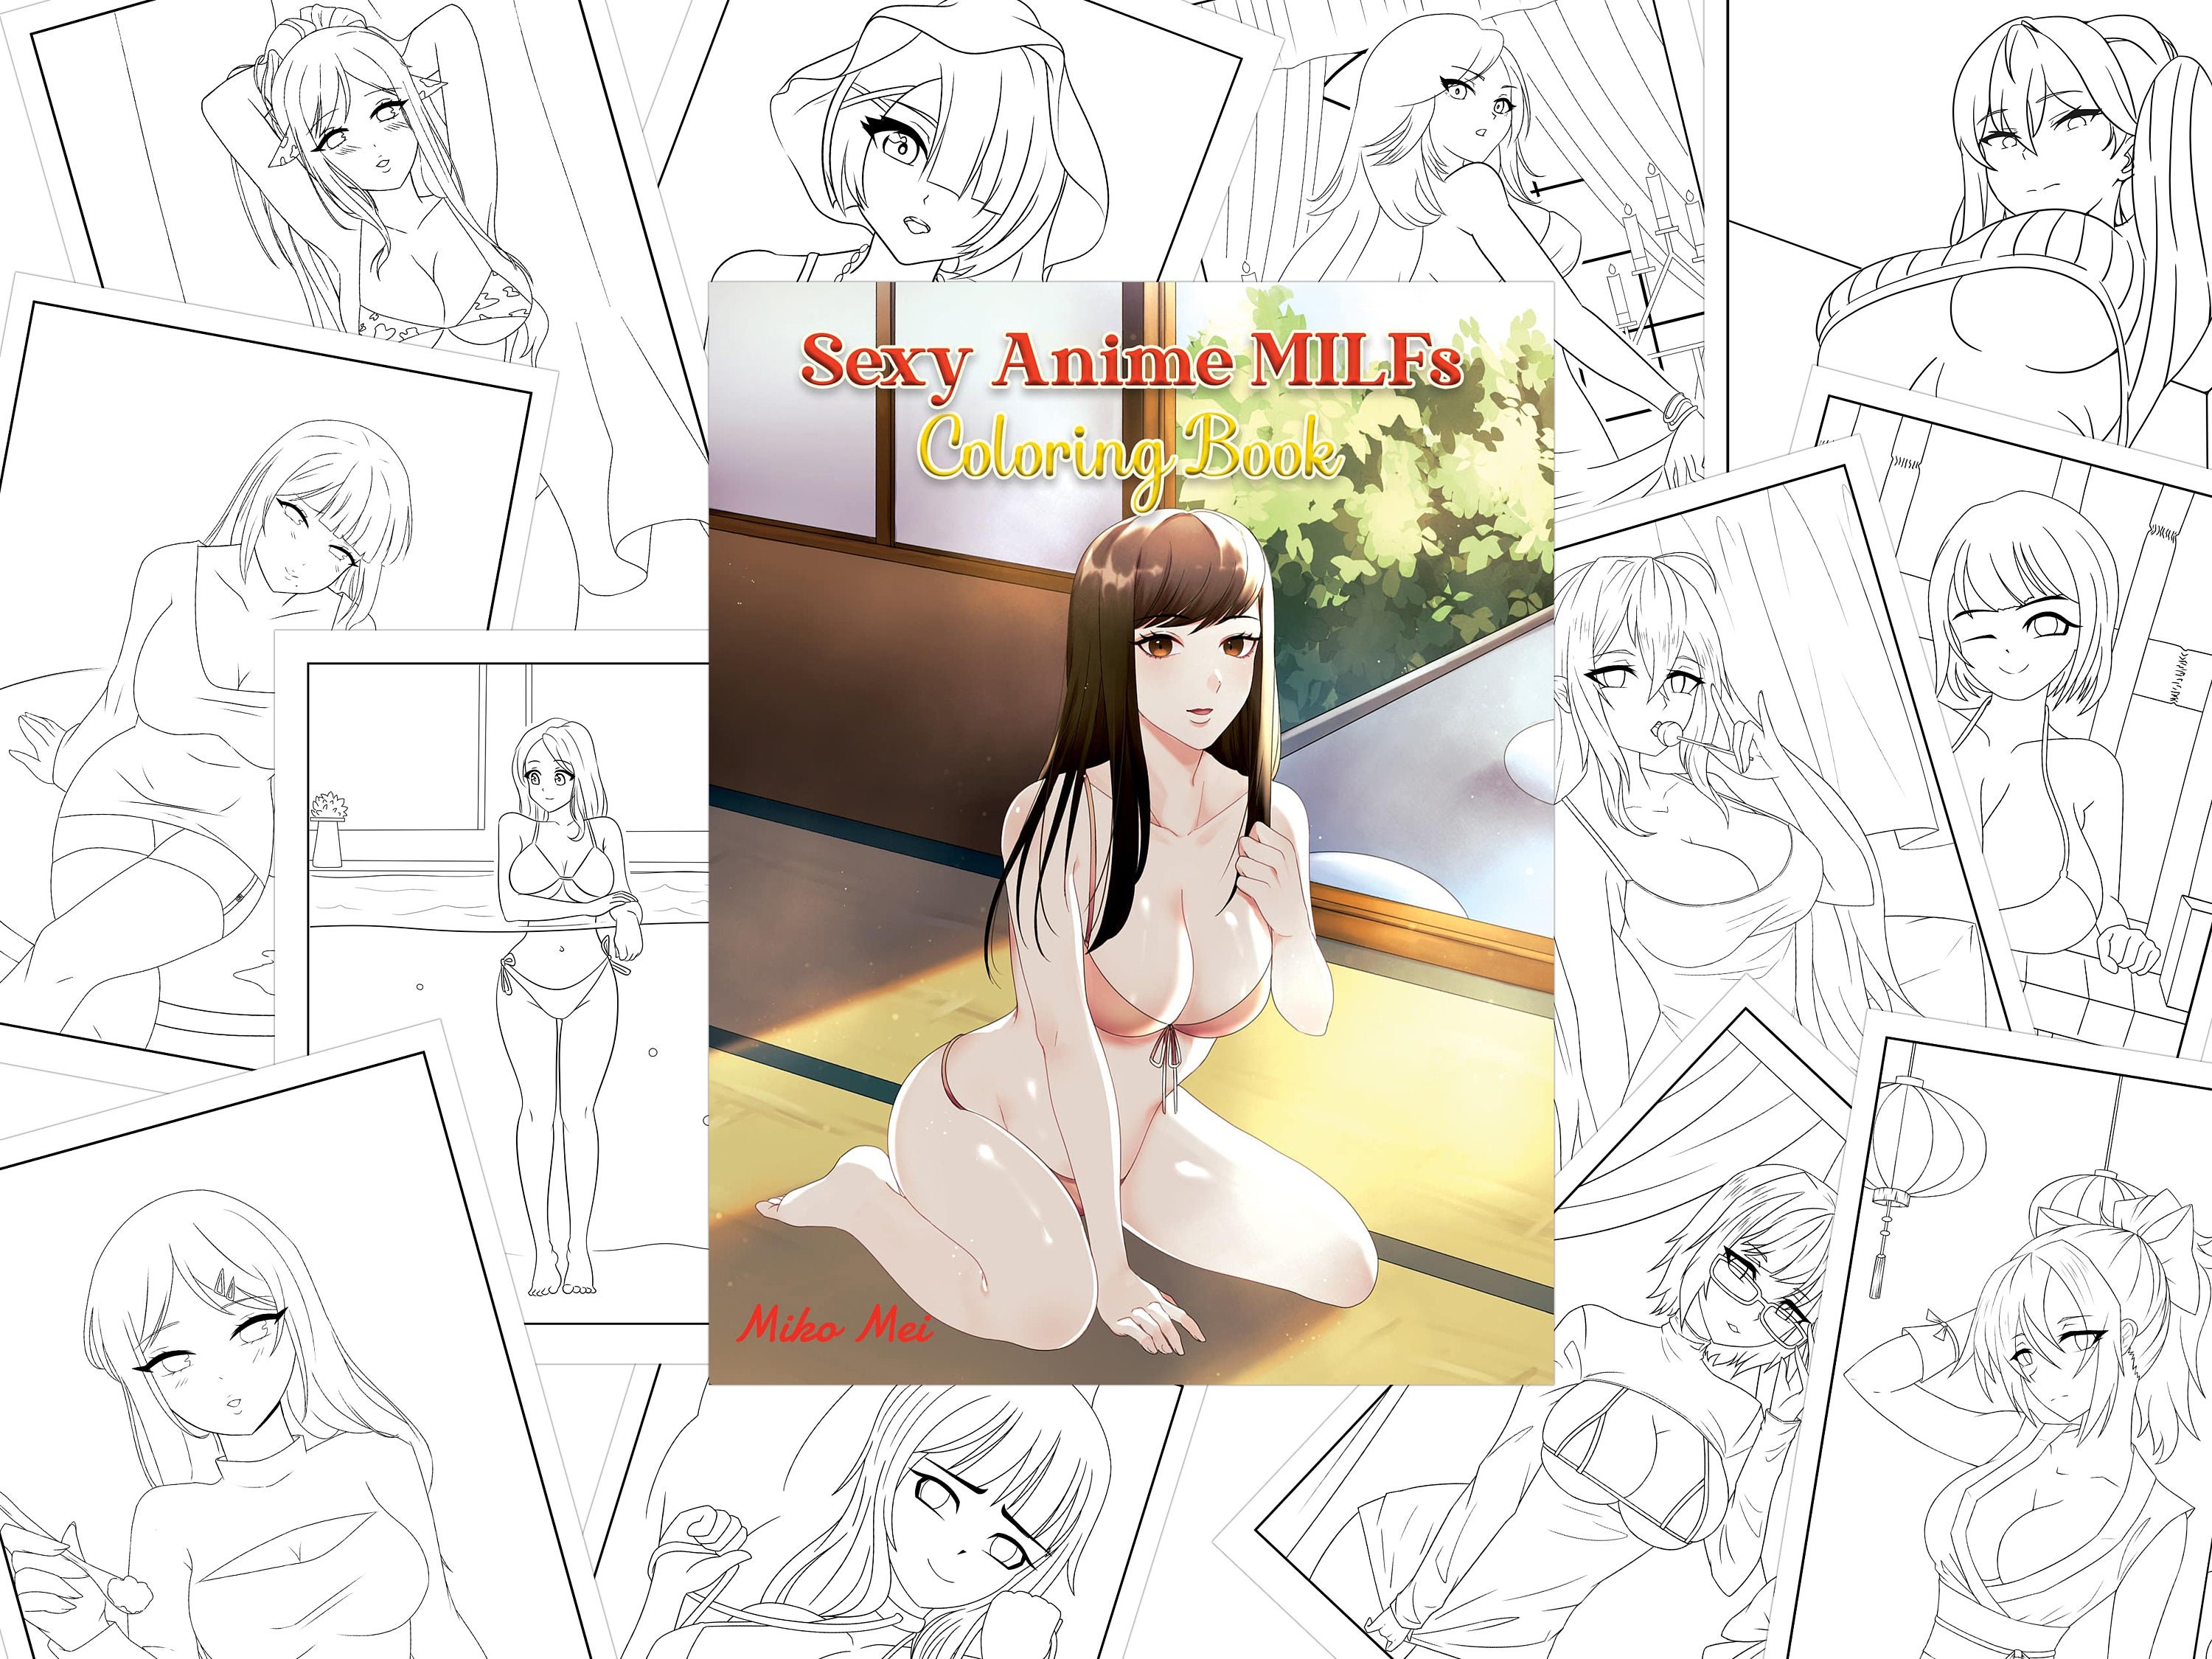 Anime milfs colouring book